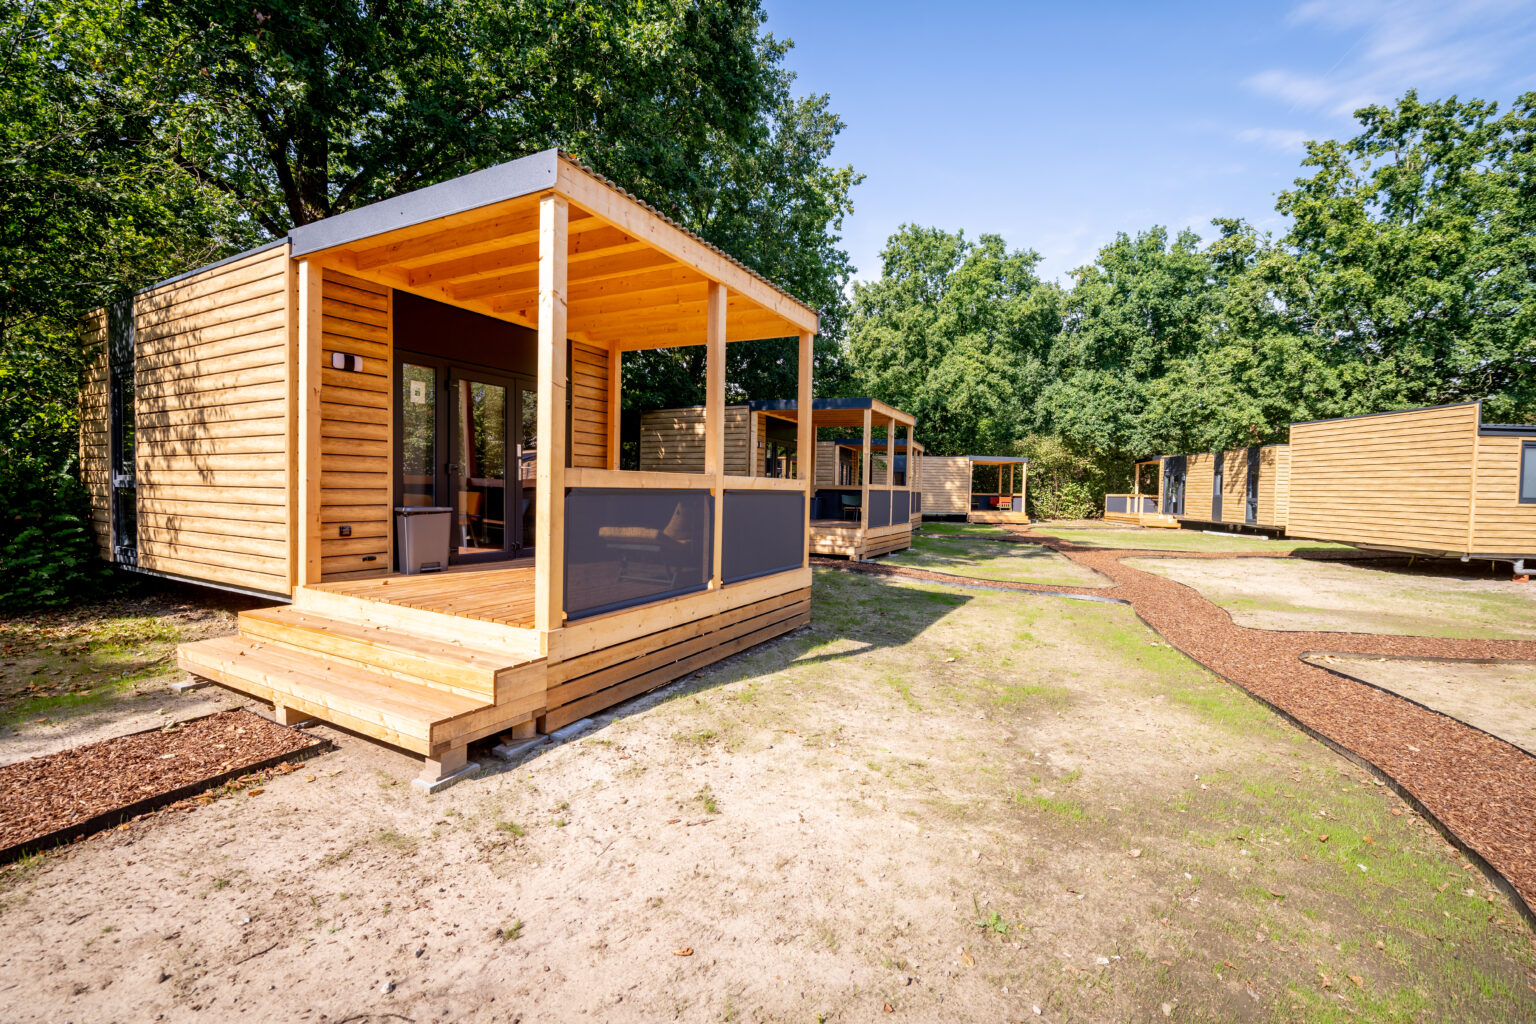 Lodge glamping in natuur